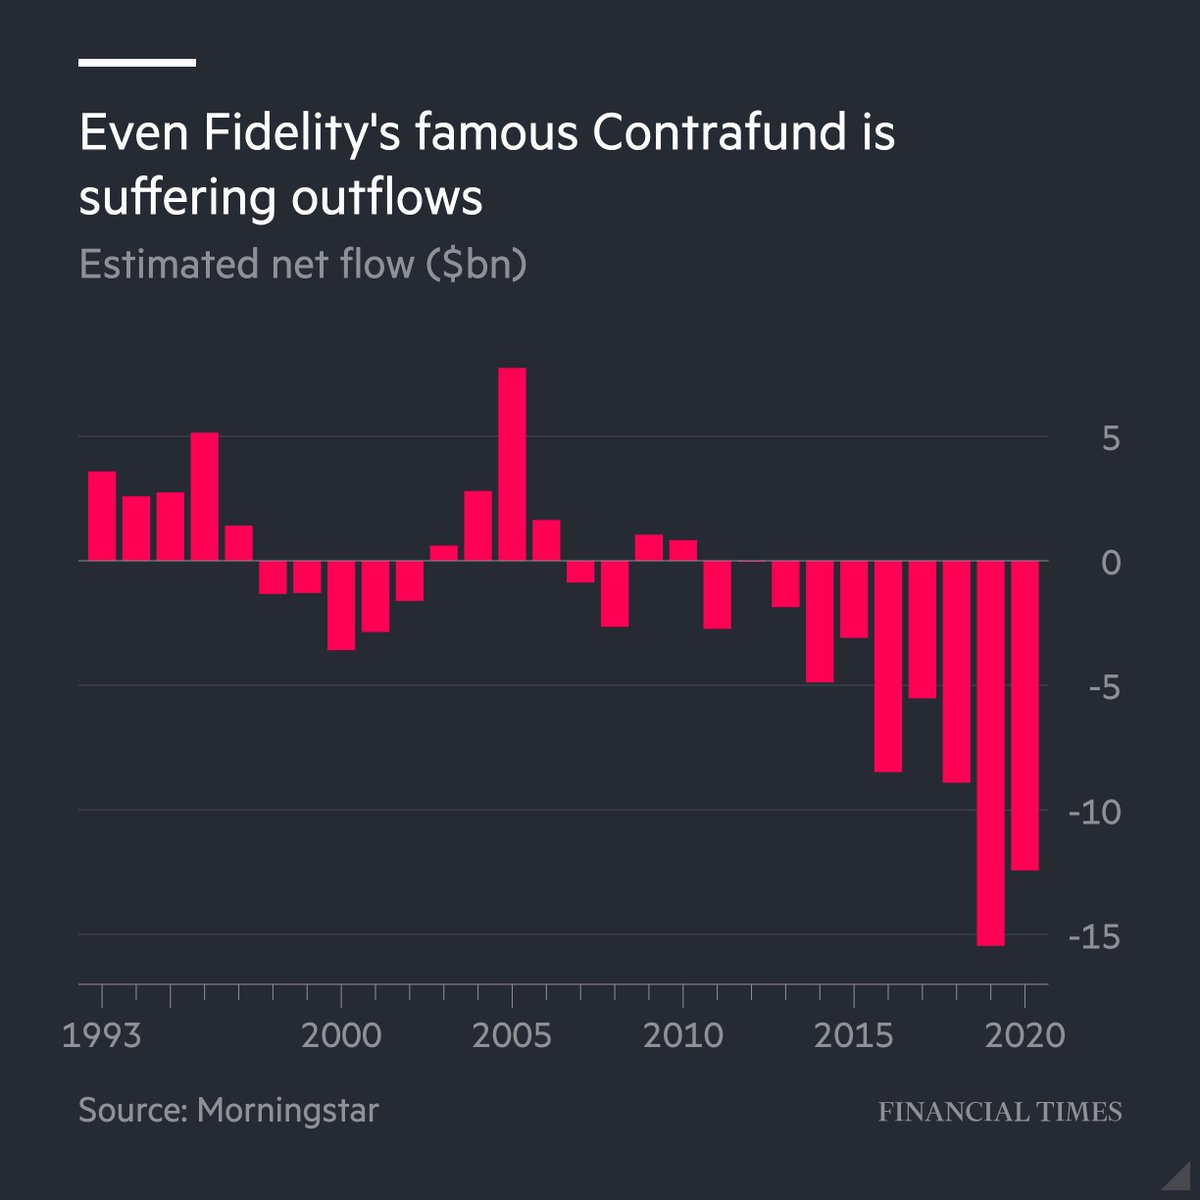 Even William Danoff's Fidelity Contrafund - the biggest active equity fund in the world - is suffering multi-billion dollar outflows these days, despite his frankly staggering 30-year track record. (Good profile of Will here:  https://www.barrons.com/articles/fidelitys-will-danoff-looks-back-on-30-years-at-contrafund-51601679688)